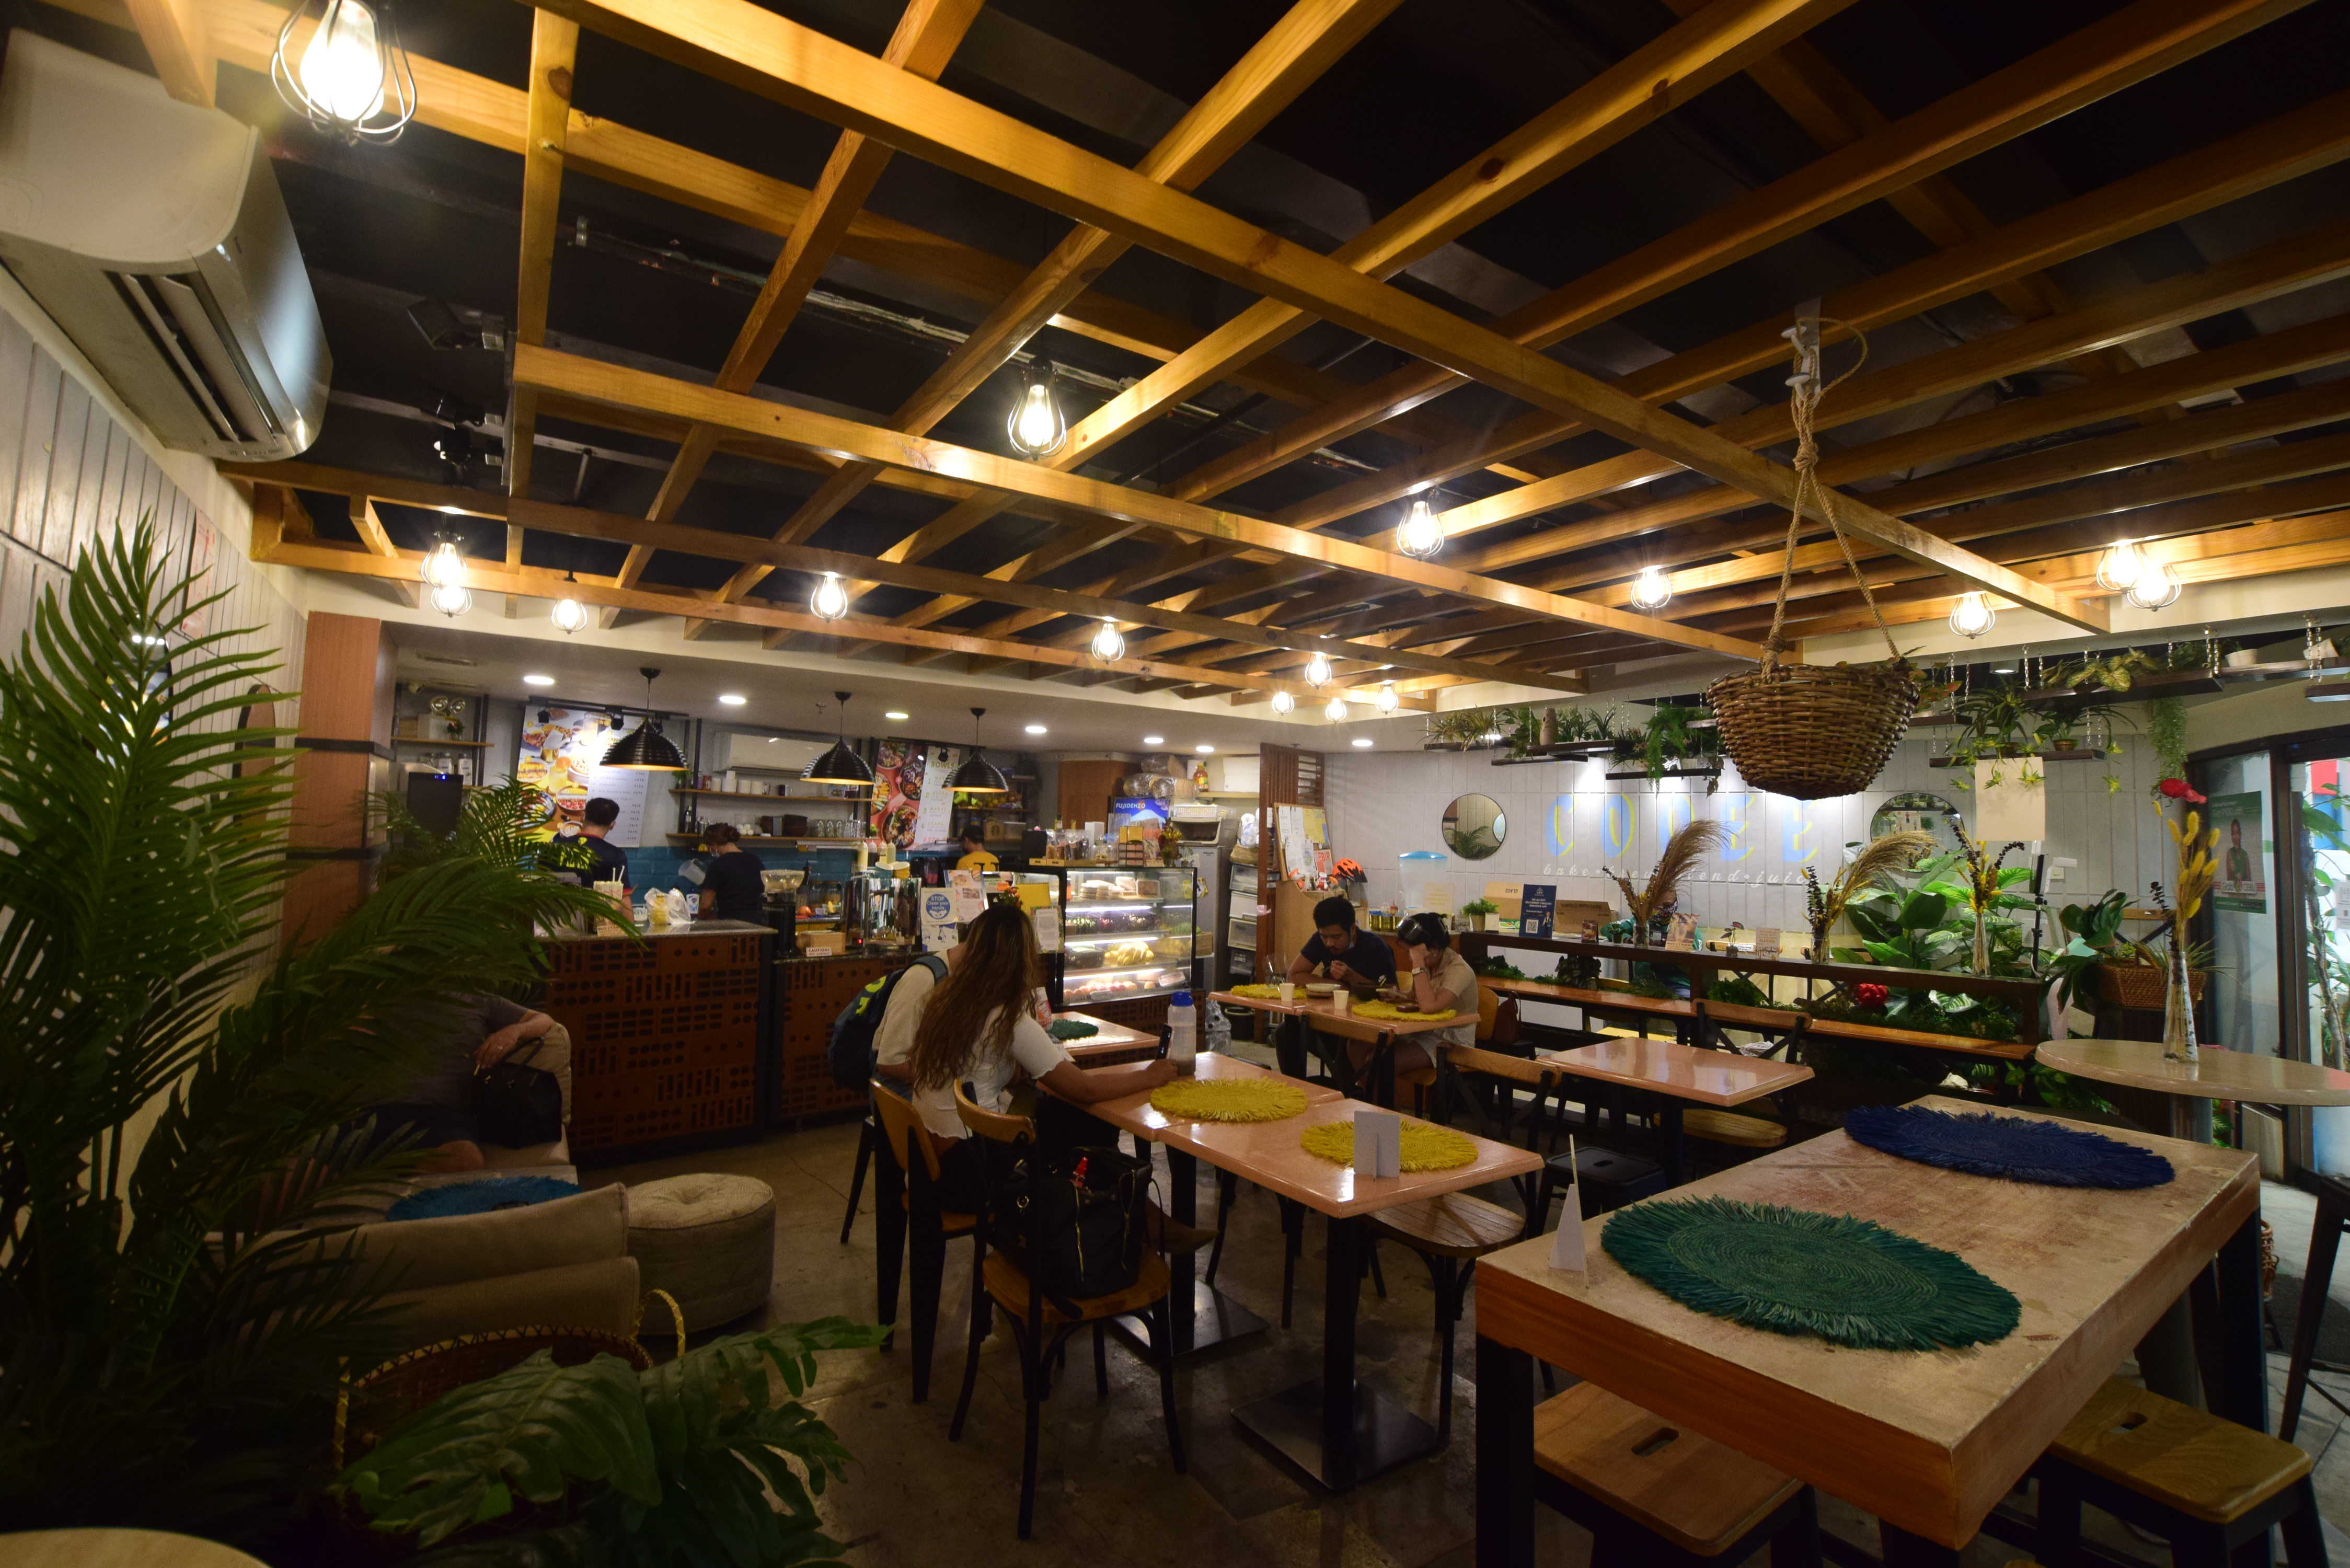 Its cozy ambiance makes it a favorite hangout for Cebuano millennials.